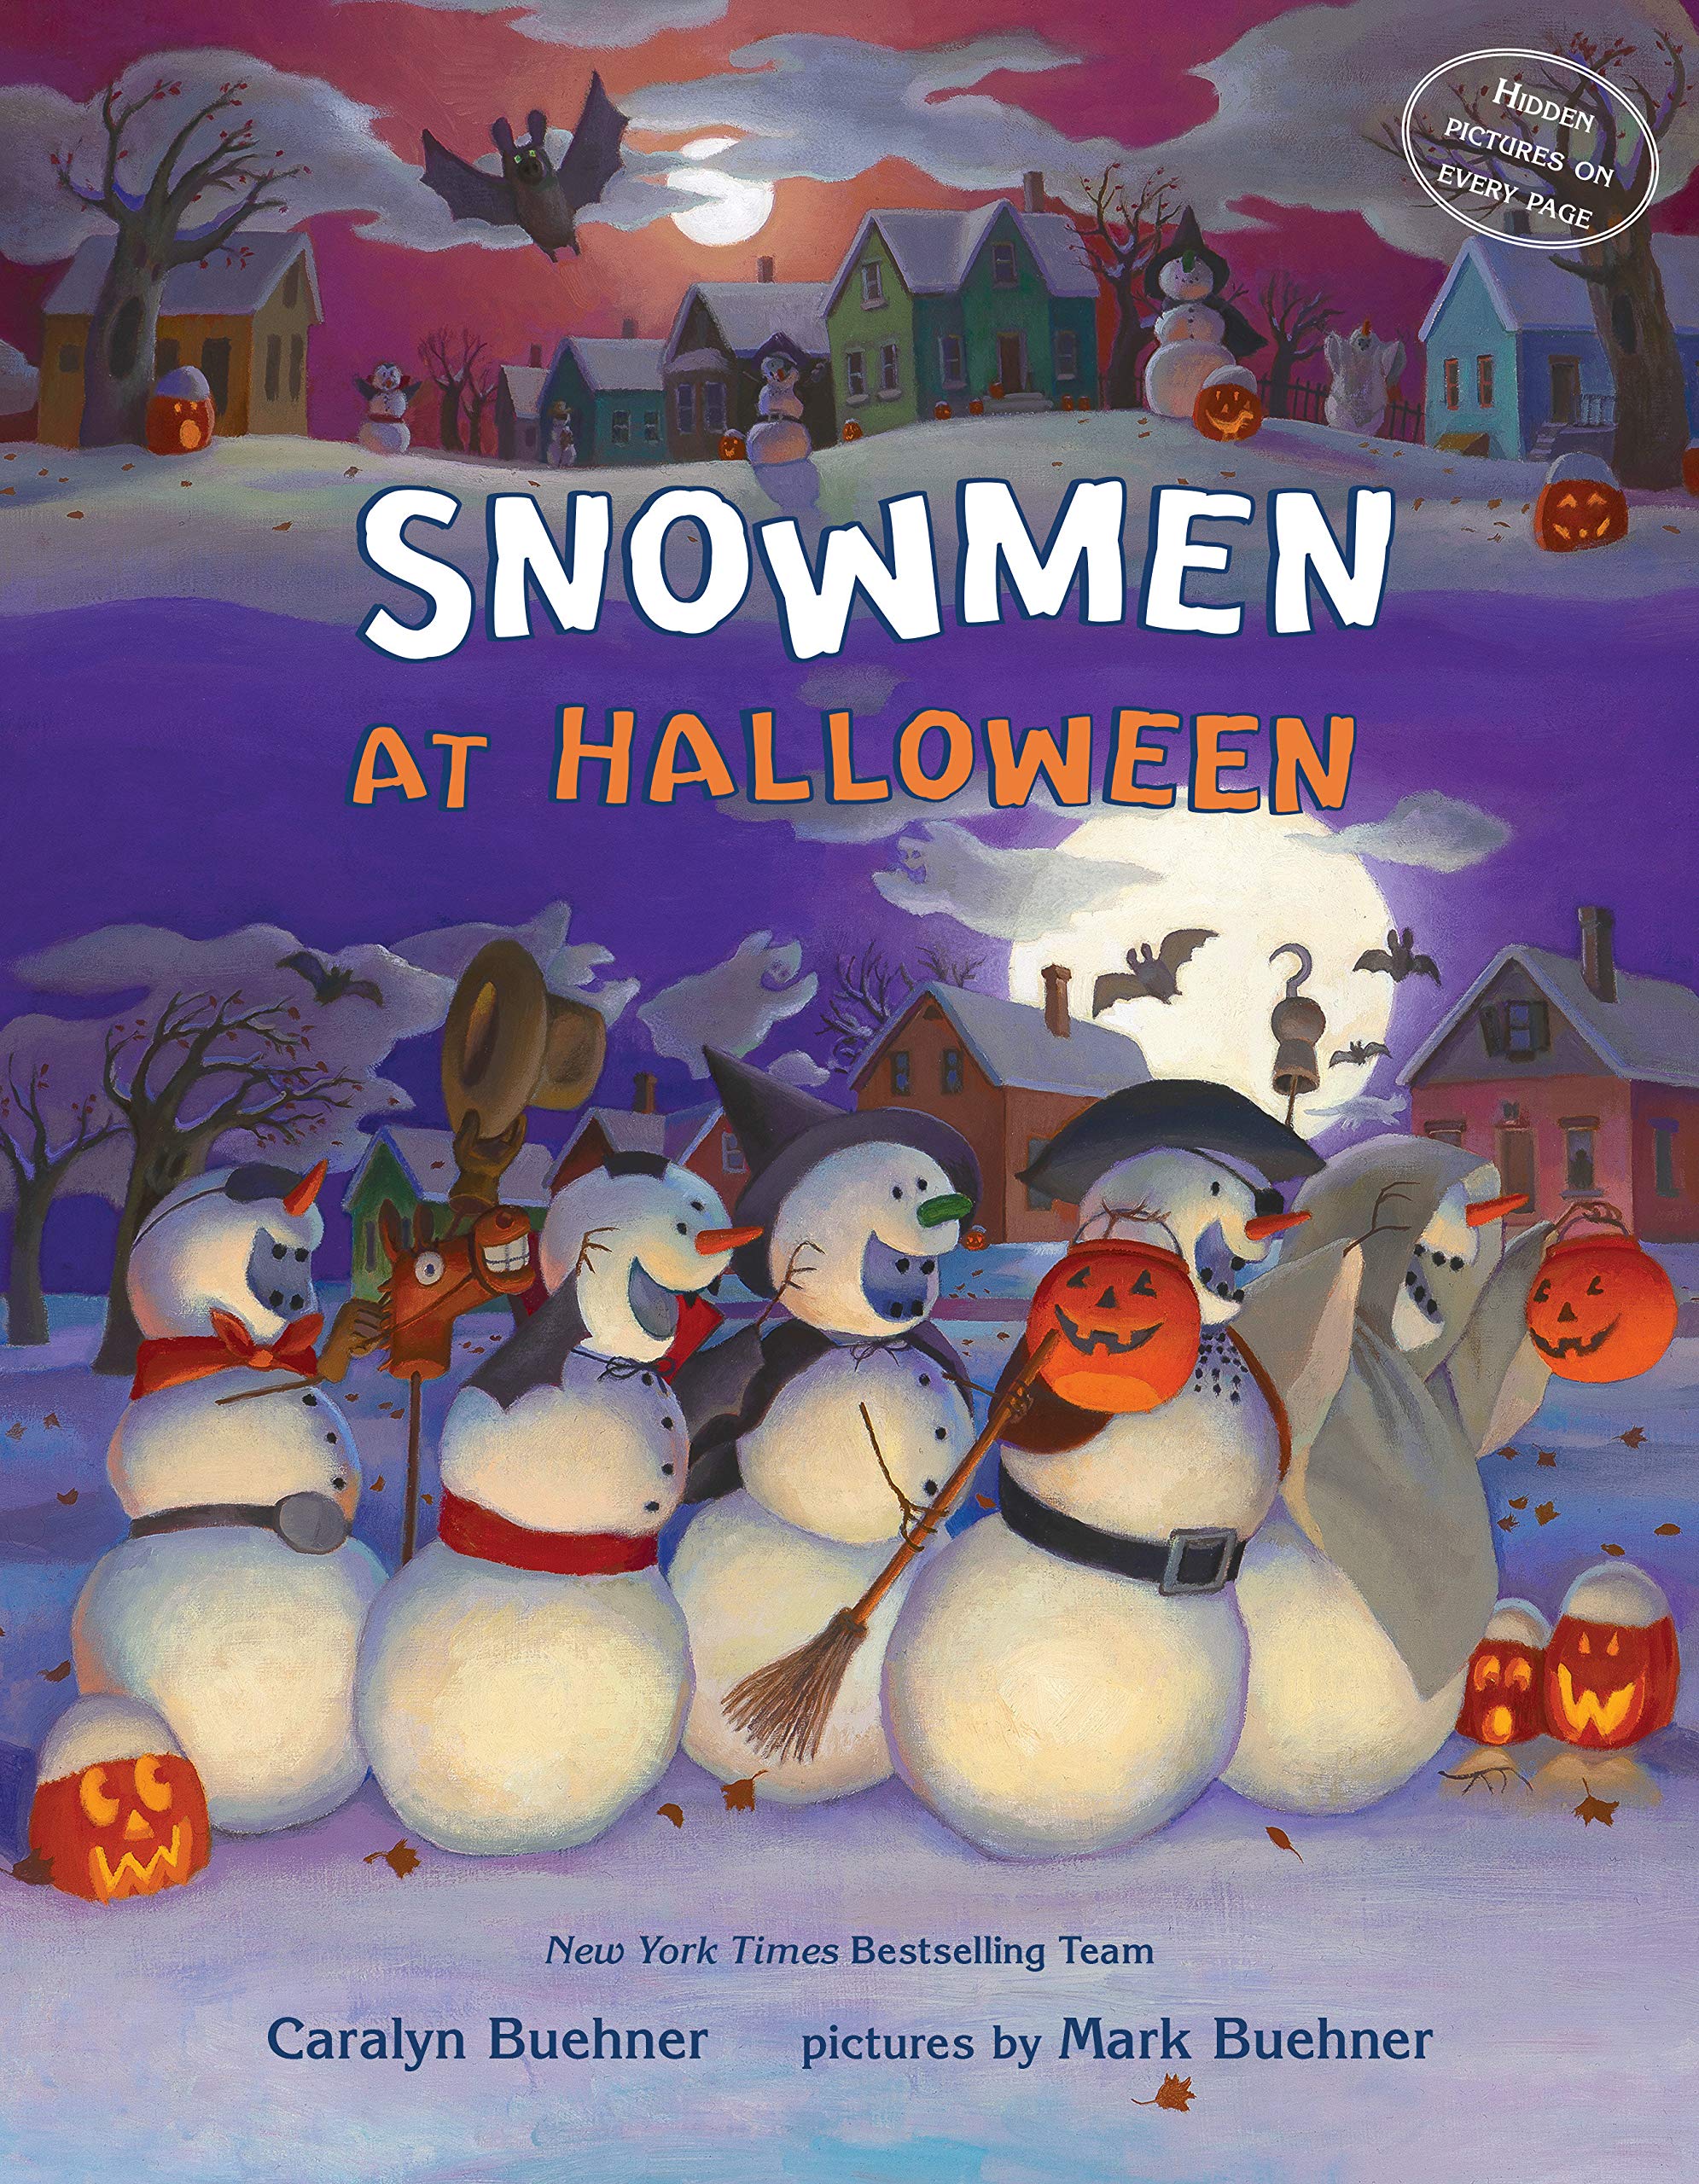 speech and language teaching concepts for snowmen at halloween in speech therapy